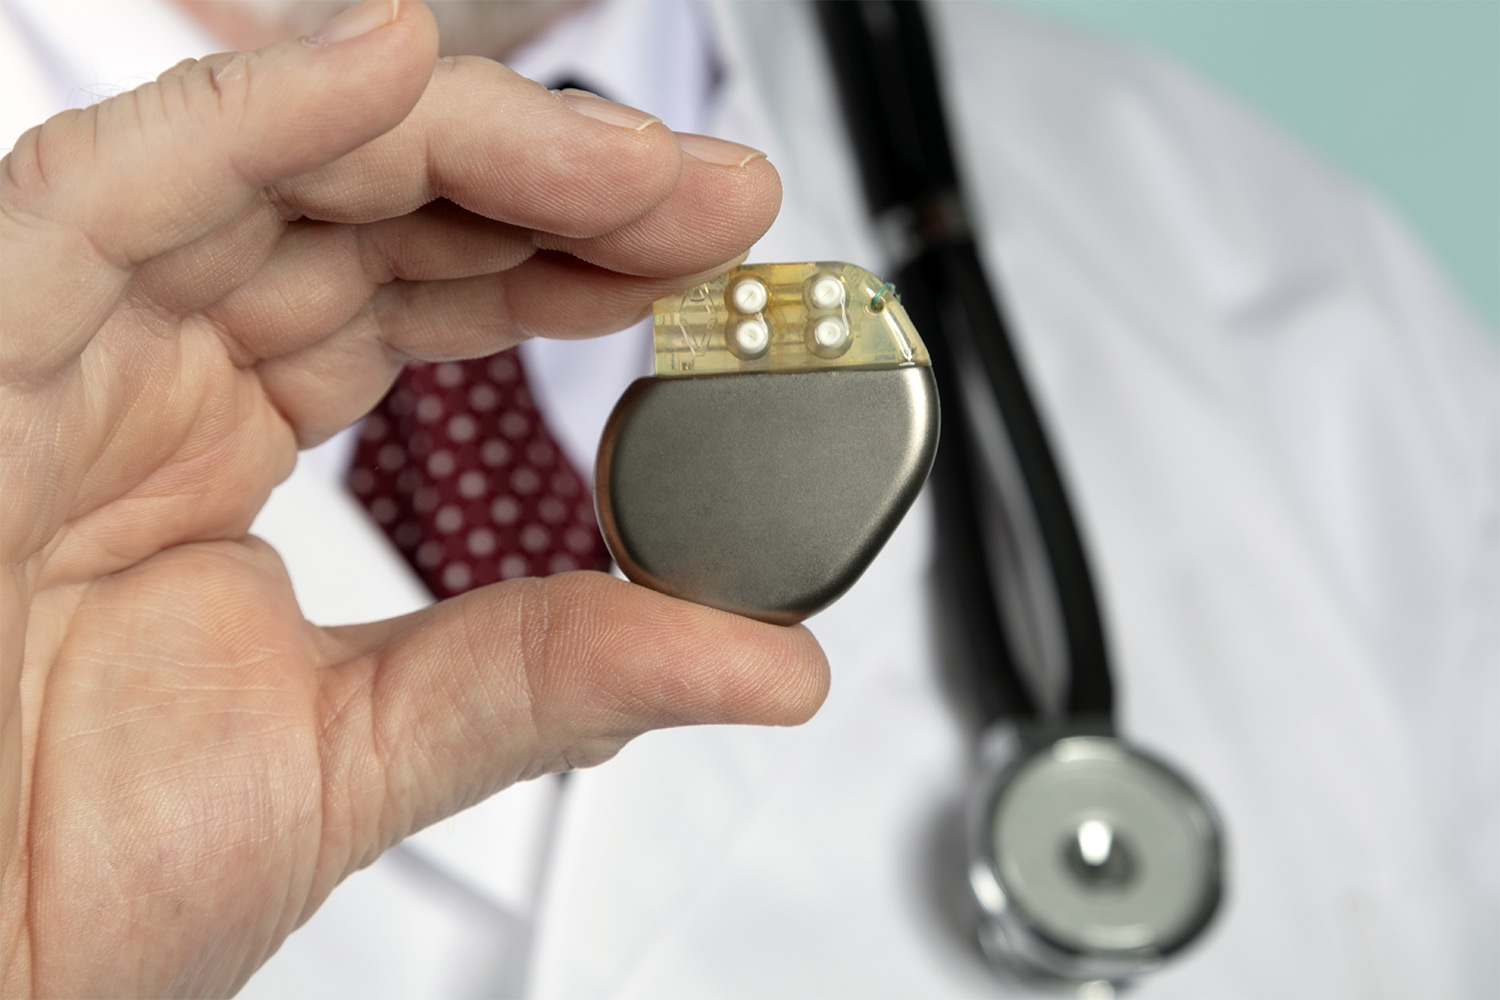 VA Benefits for Pacemakers and Heart Conditions